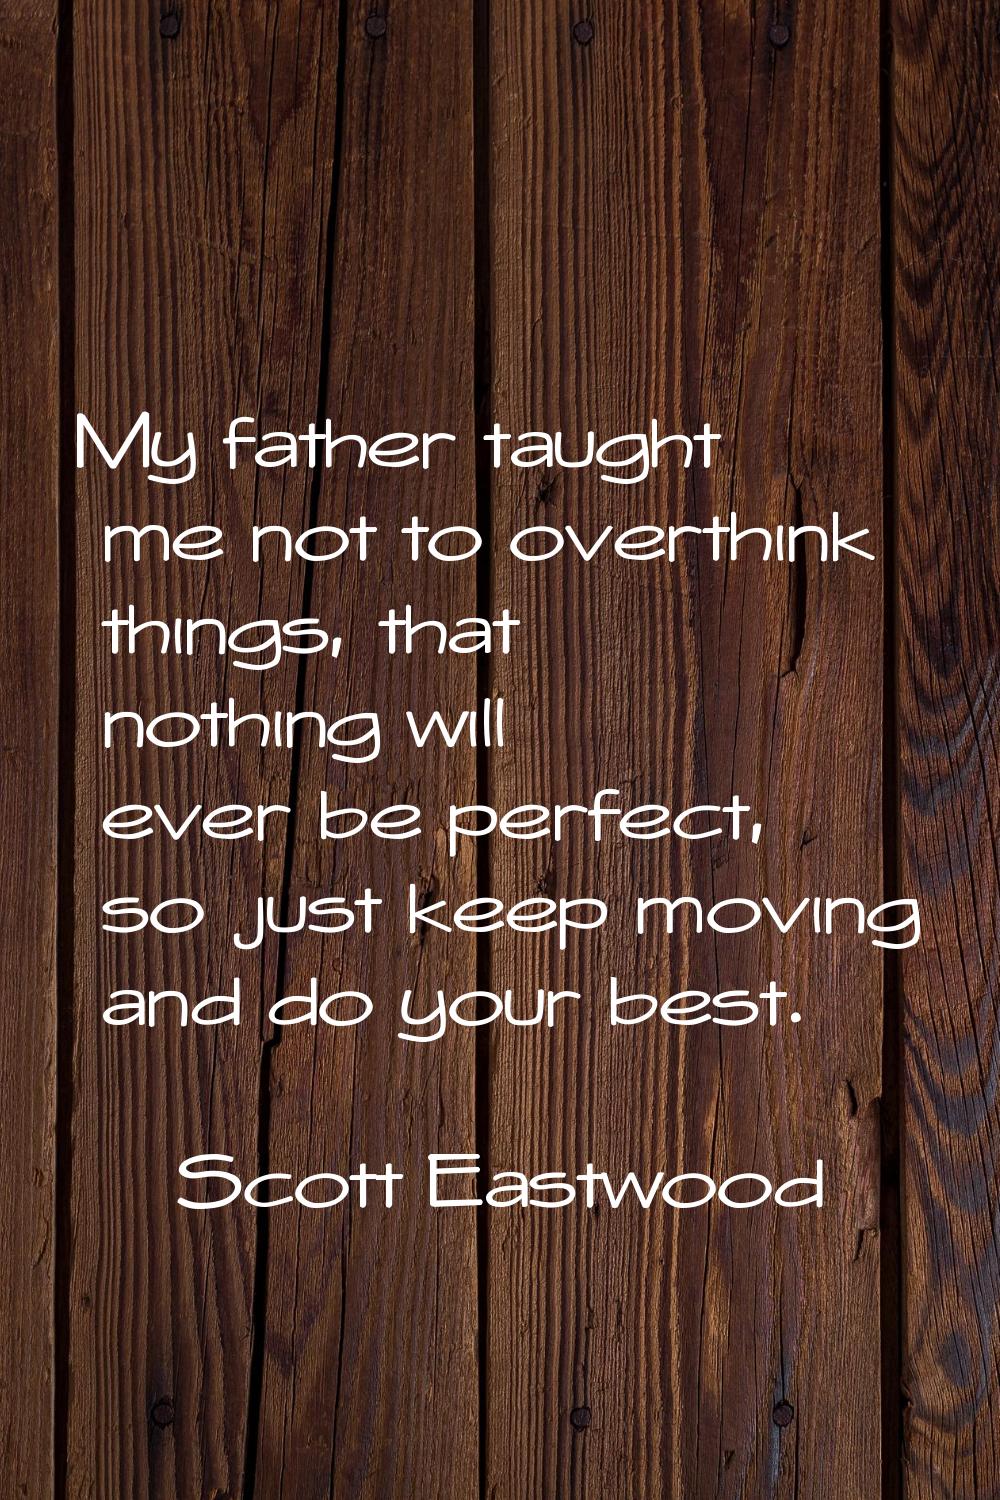 My father taught me not to overthink things, that nothing will ever be perfect, so just keep moving